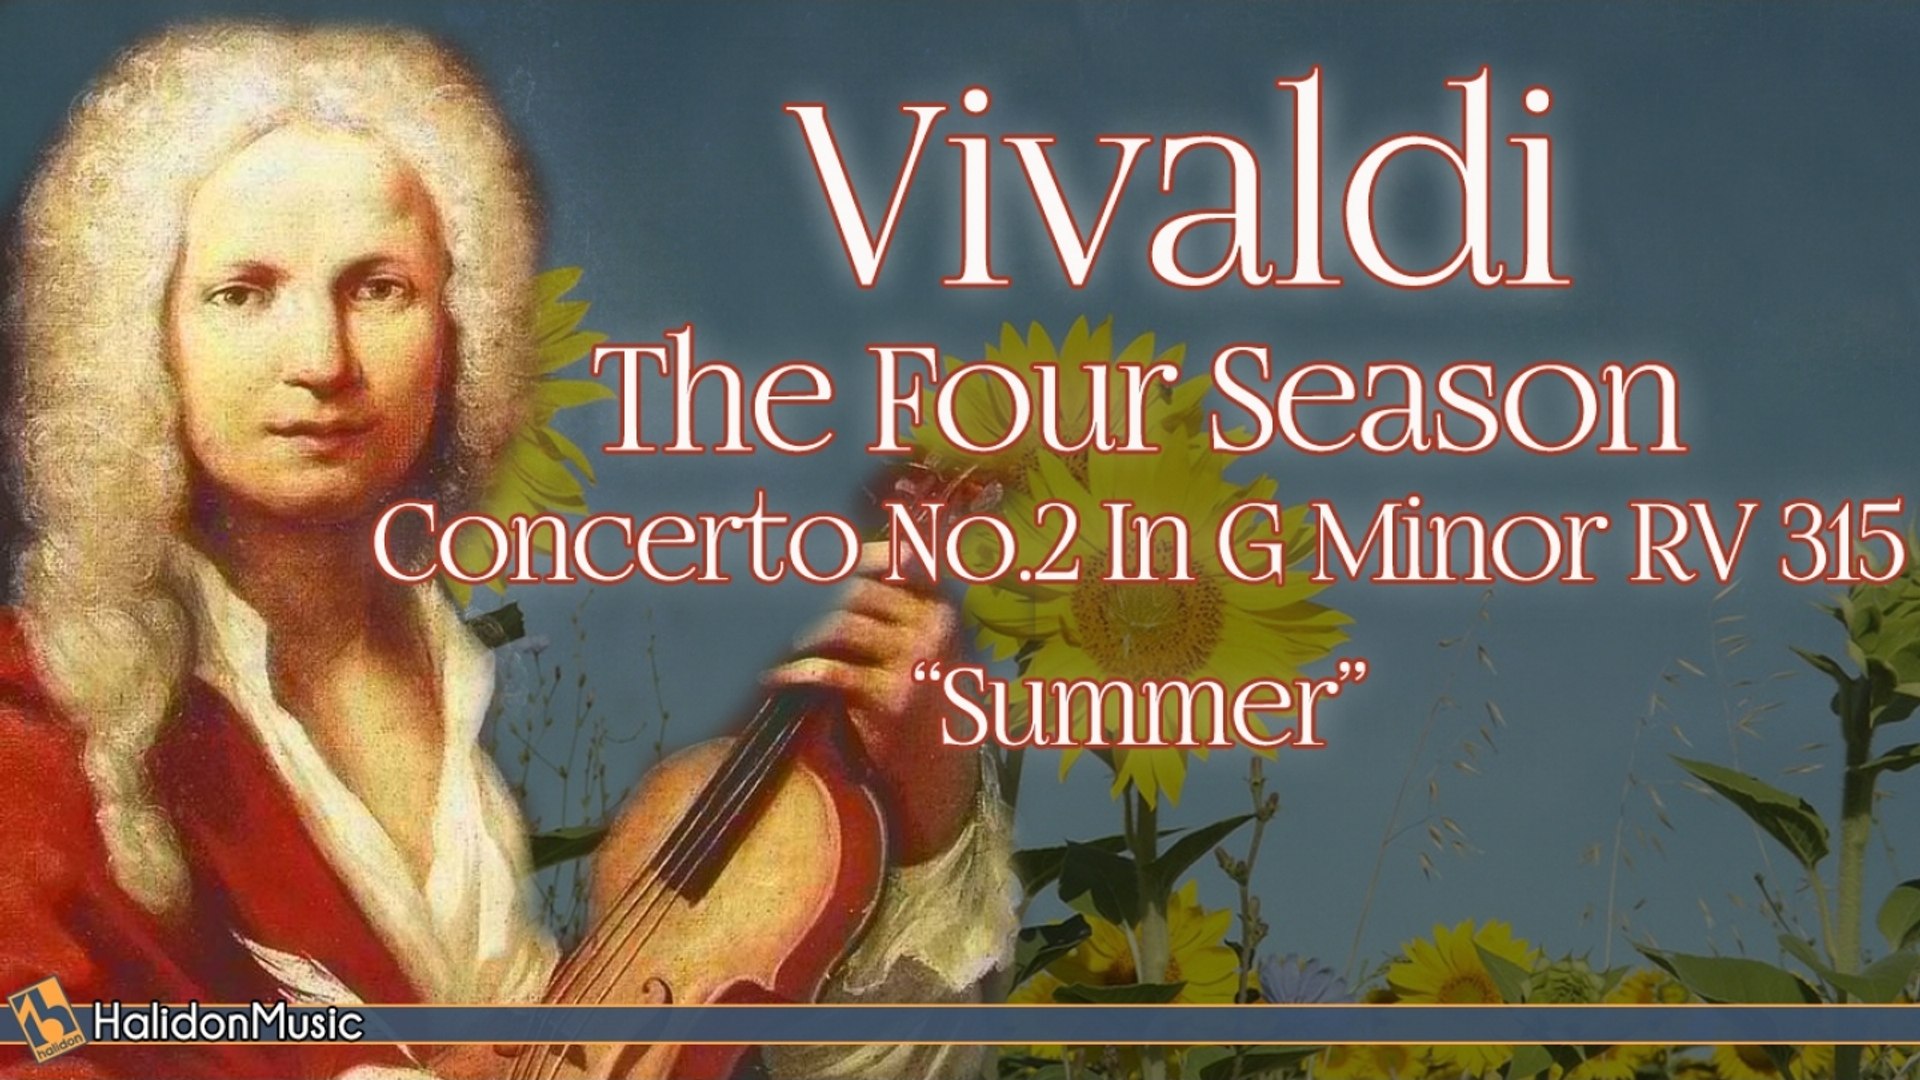 Giuseppe Lanzetta - Vivaldi: Summer / The Four Seasons Classical Music for  Relaxation and Nature - Video Dailymotion